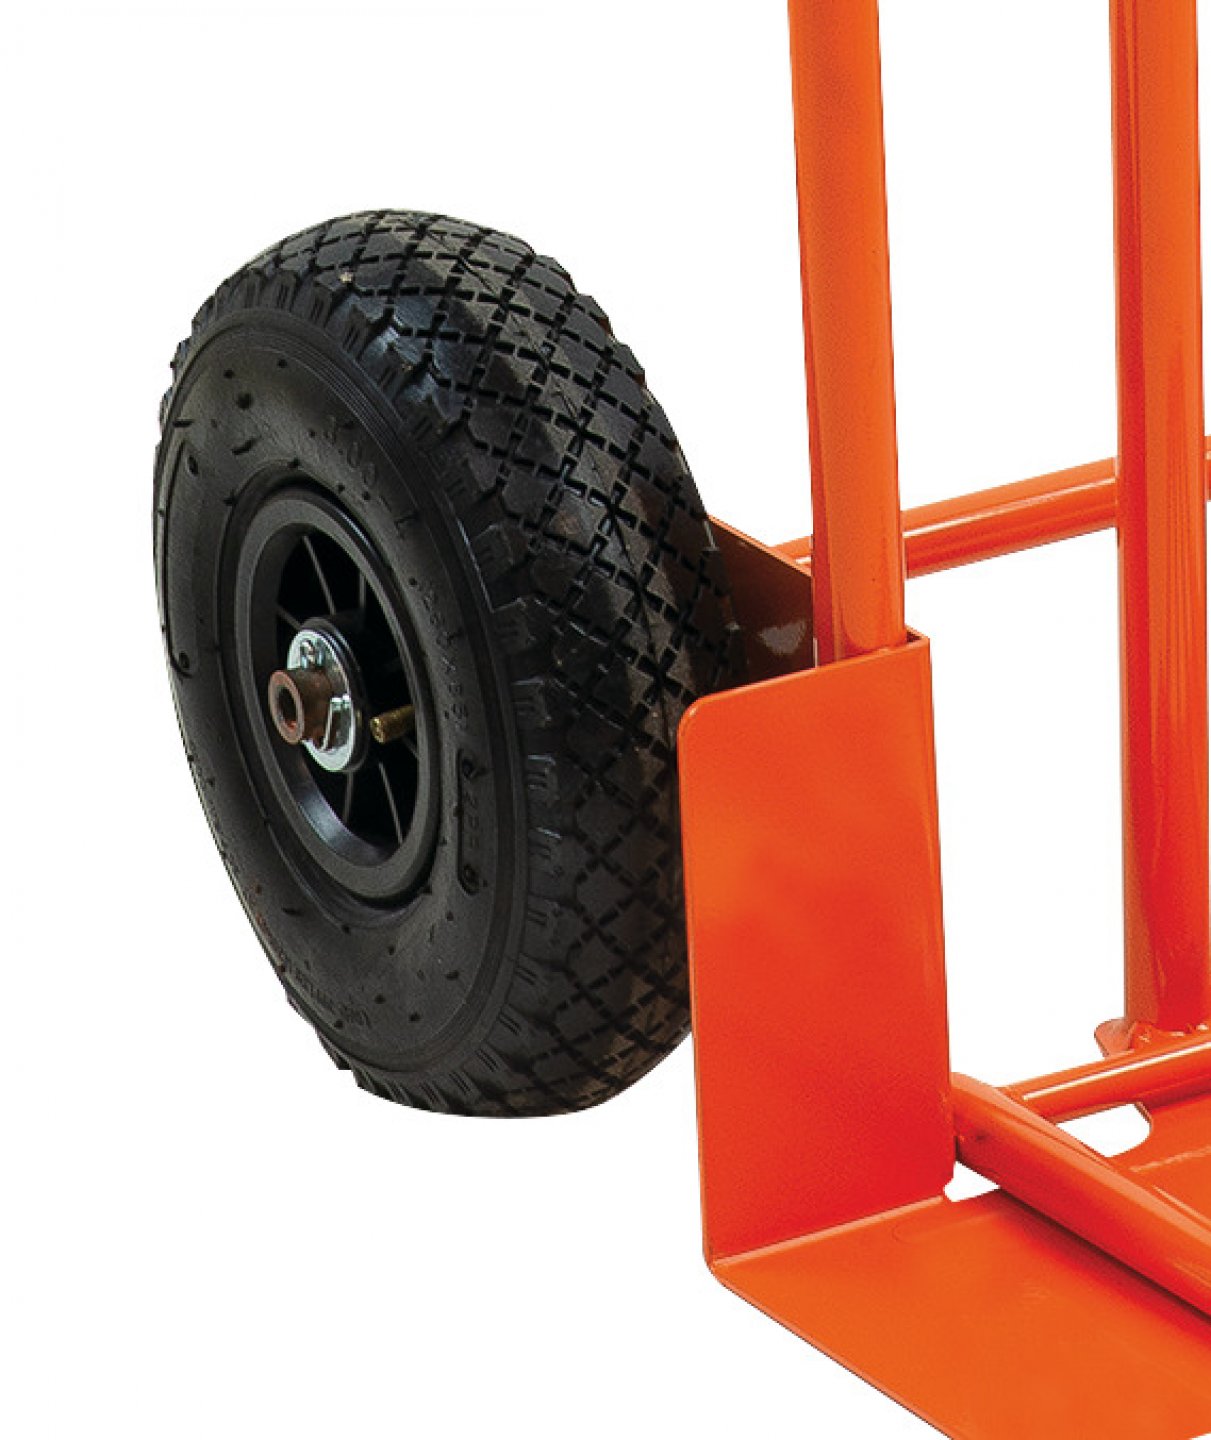 Axis hand truck - puncture proof wheels 09